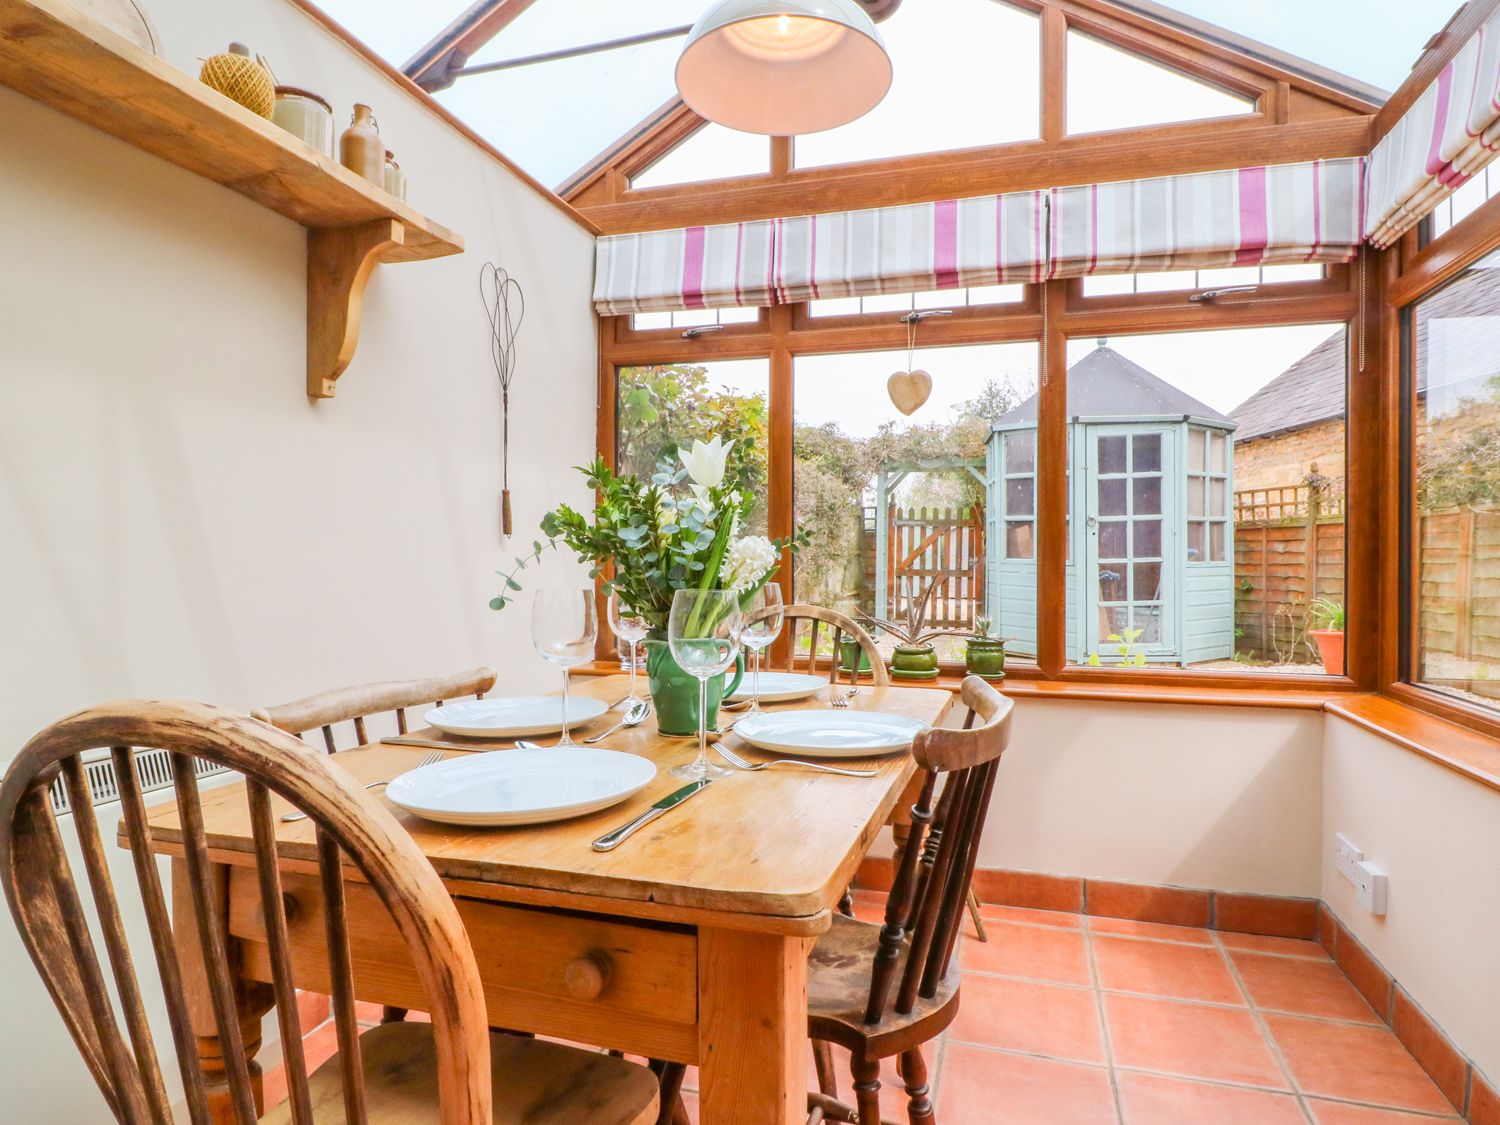 Horseshoe Cottage nr Hook Norton, Warwickshire. Two-bedroom home with woodburning stove. Near a pub.